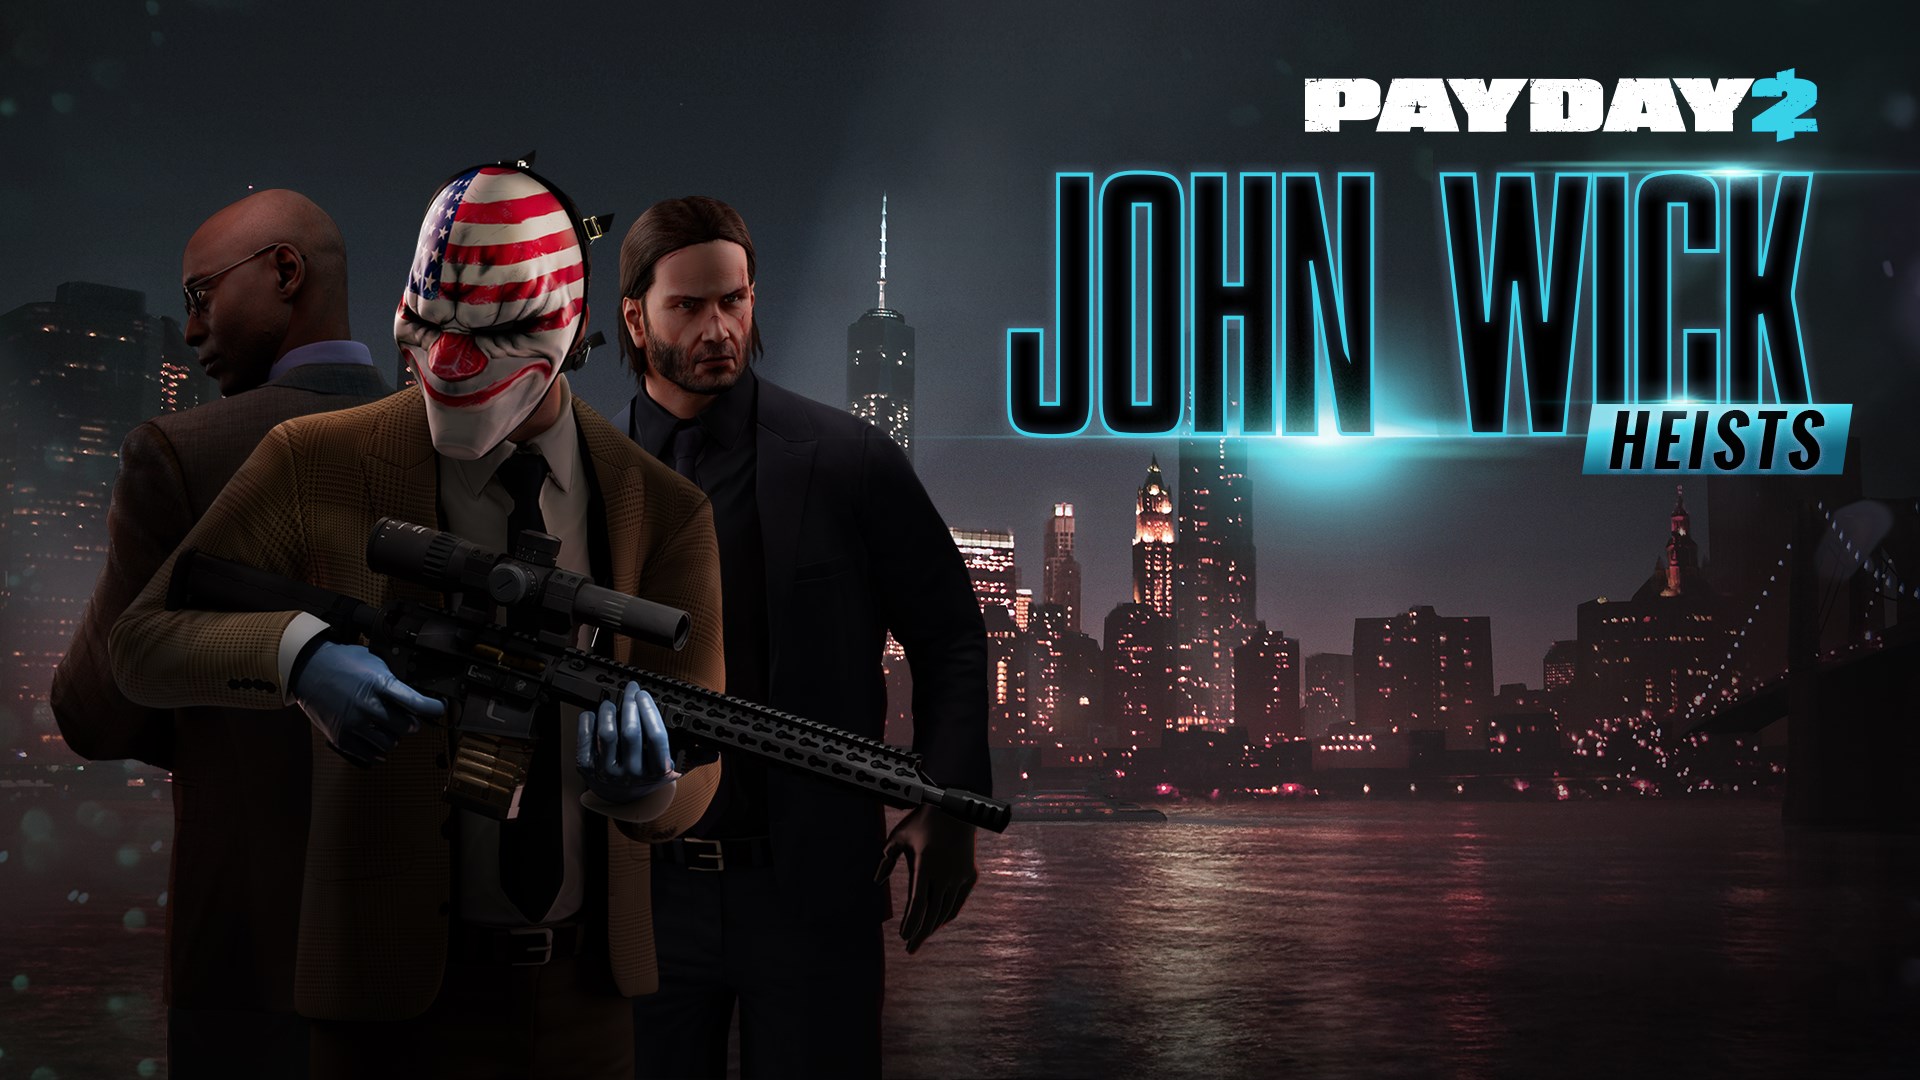 Buy Payday 2 Crimewave Edition John Wick Heists Images, Photos, Reviews